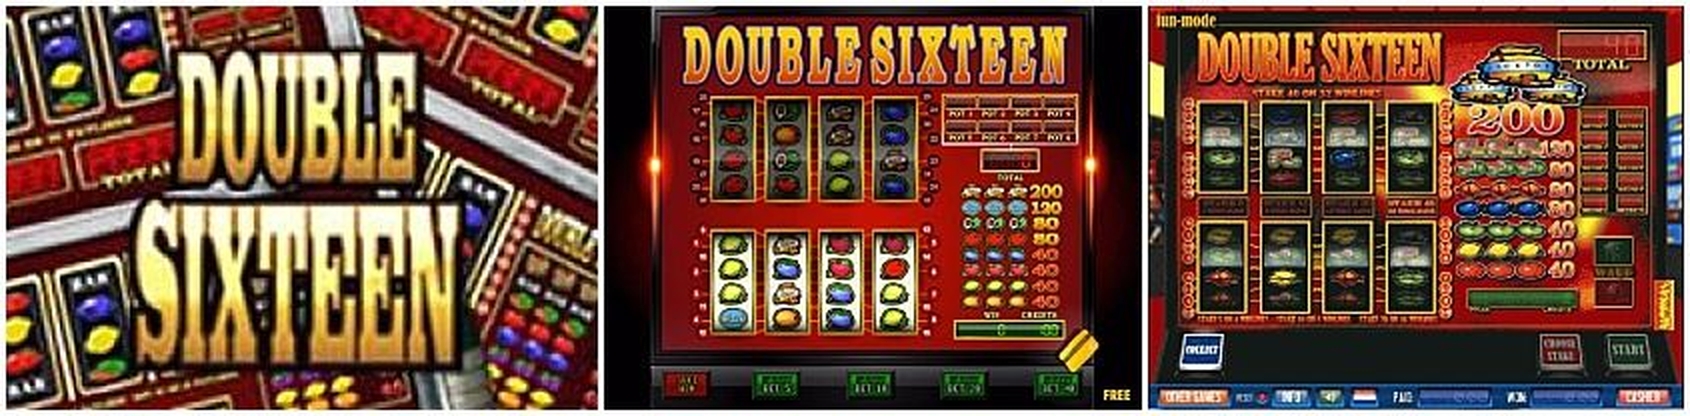 The Double Sixteen Online Slot Demo Game by Betsoft